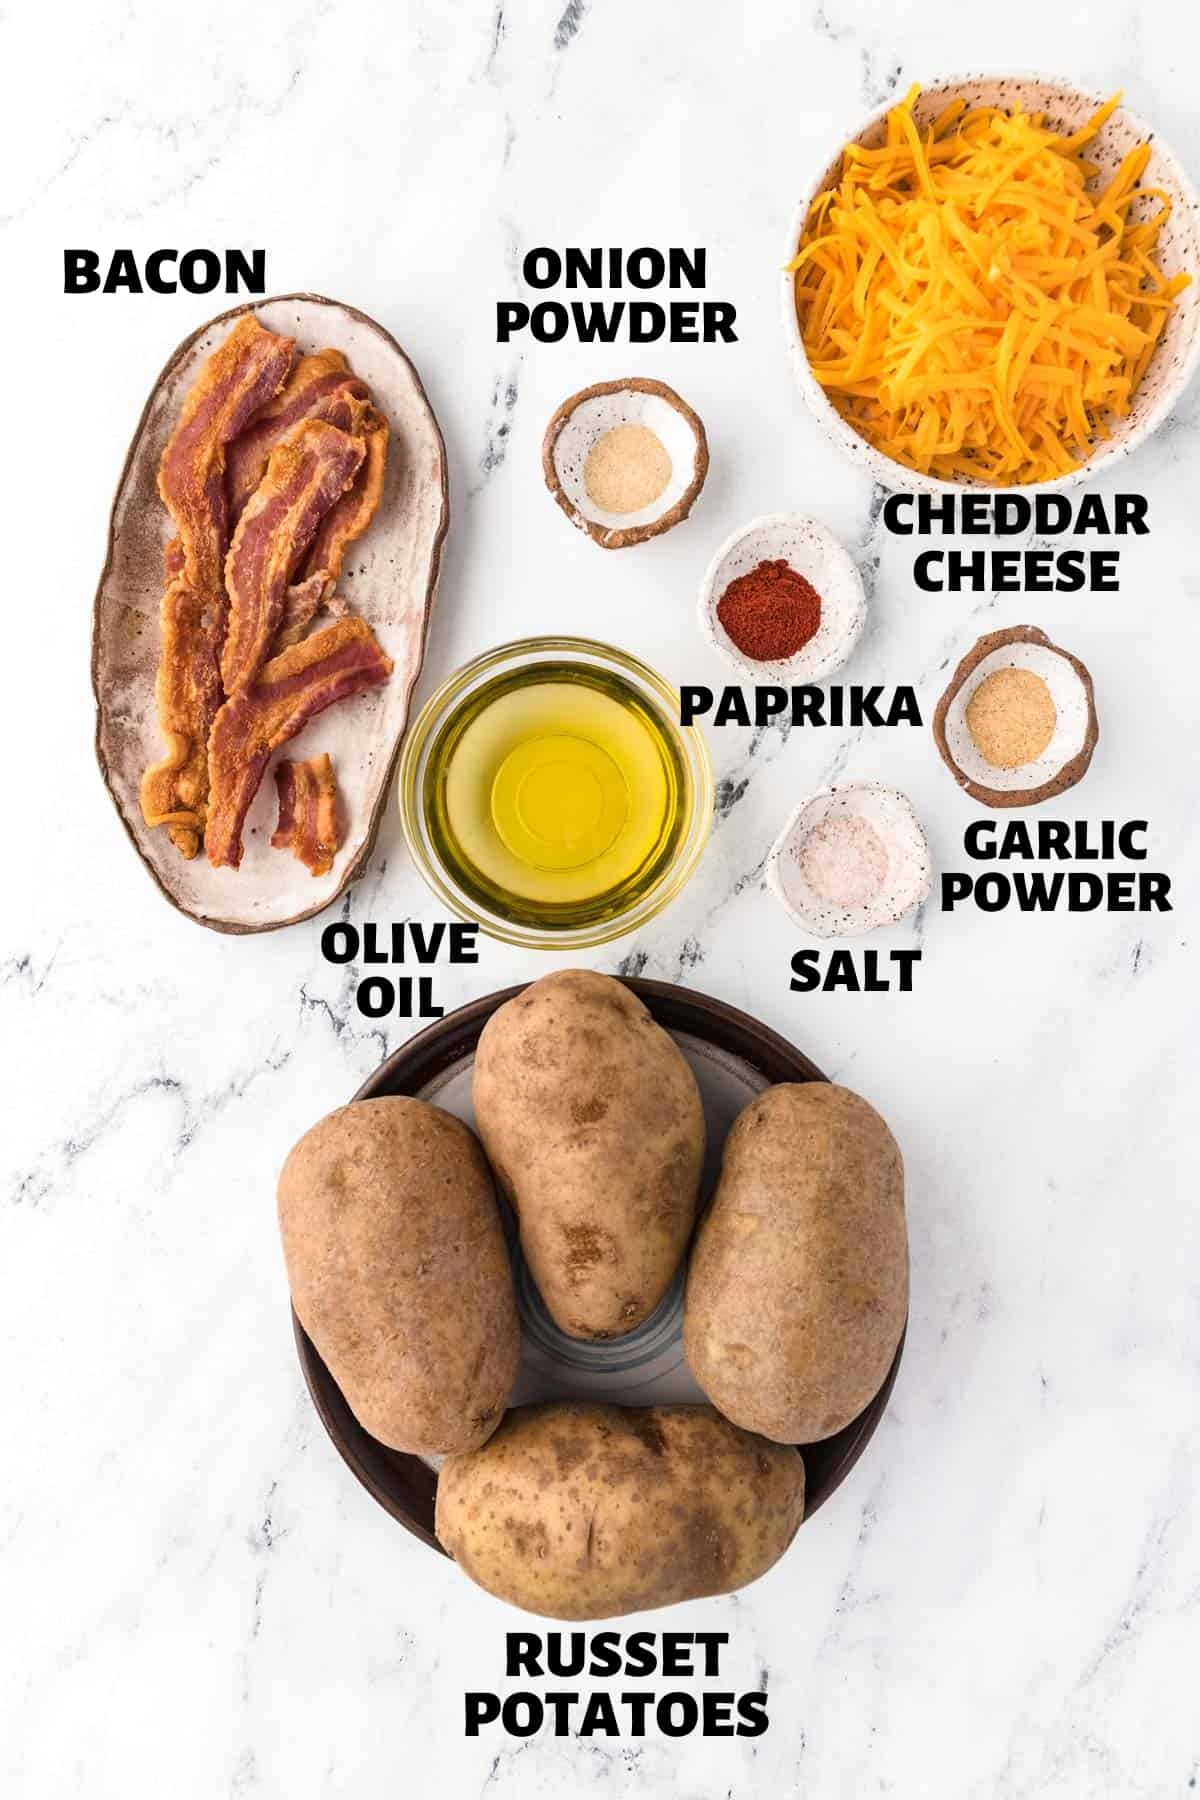 A labeled image including all the ingredients needed to make loaded baked potato skins.